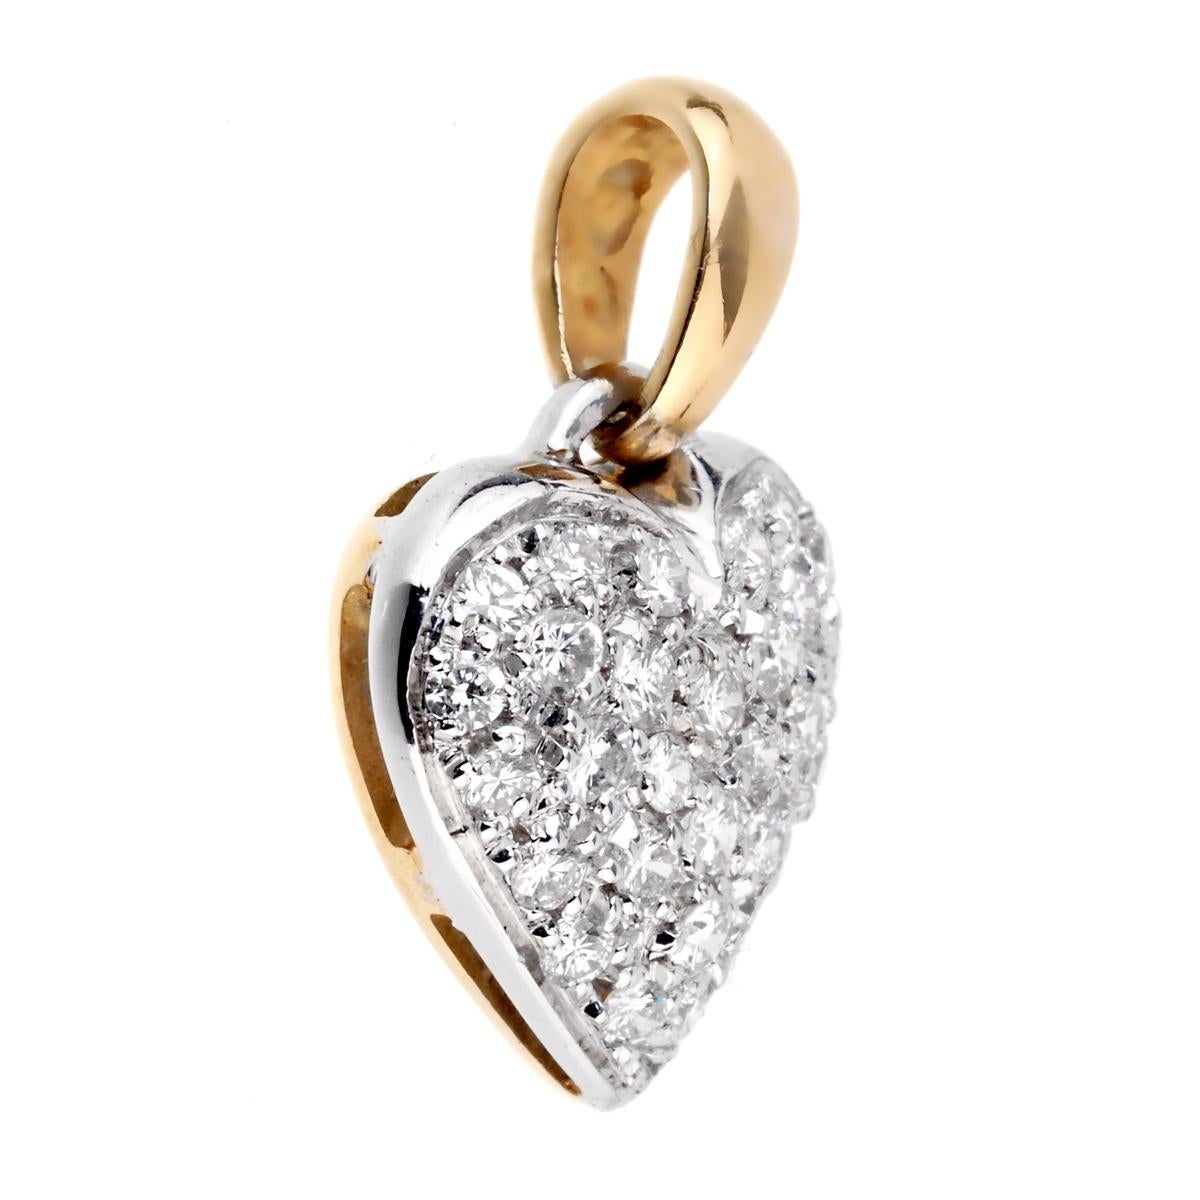 A chic heart pendant adorned with the finest round brilliant cut diamonds in 18k white and yellow gold. The diamonds weight is appx .70ct.